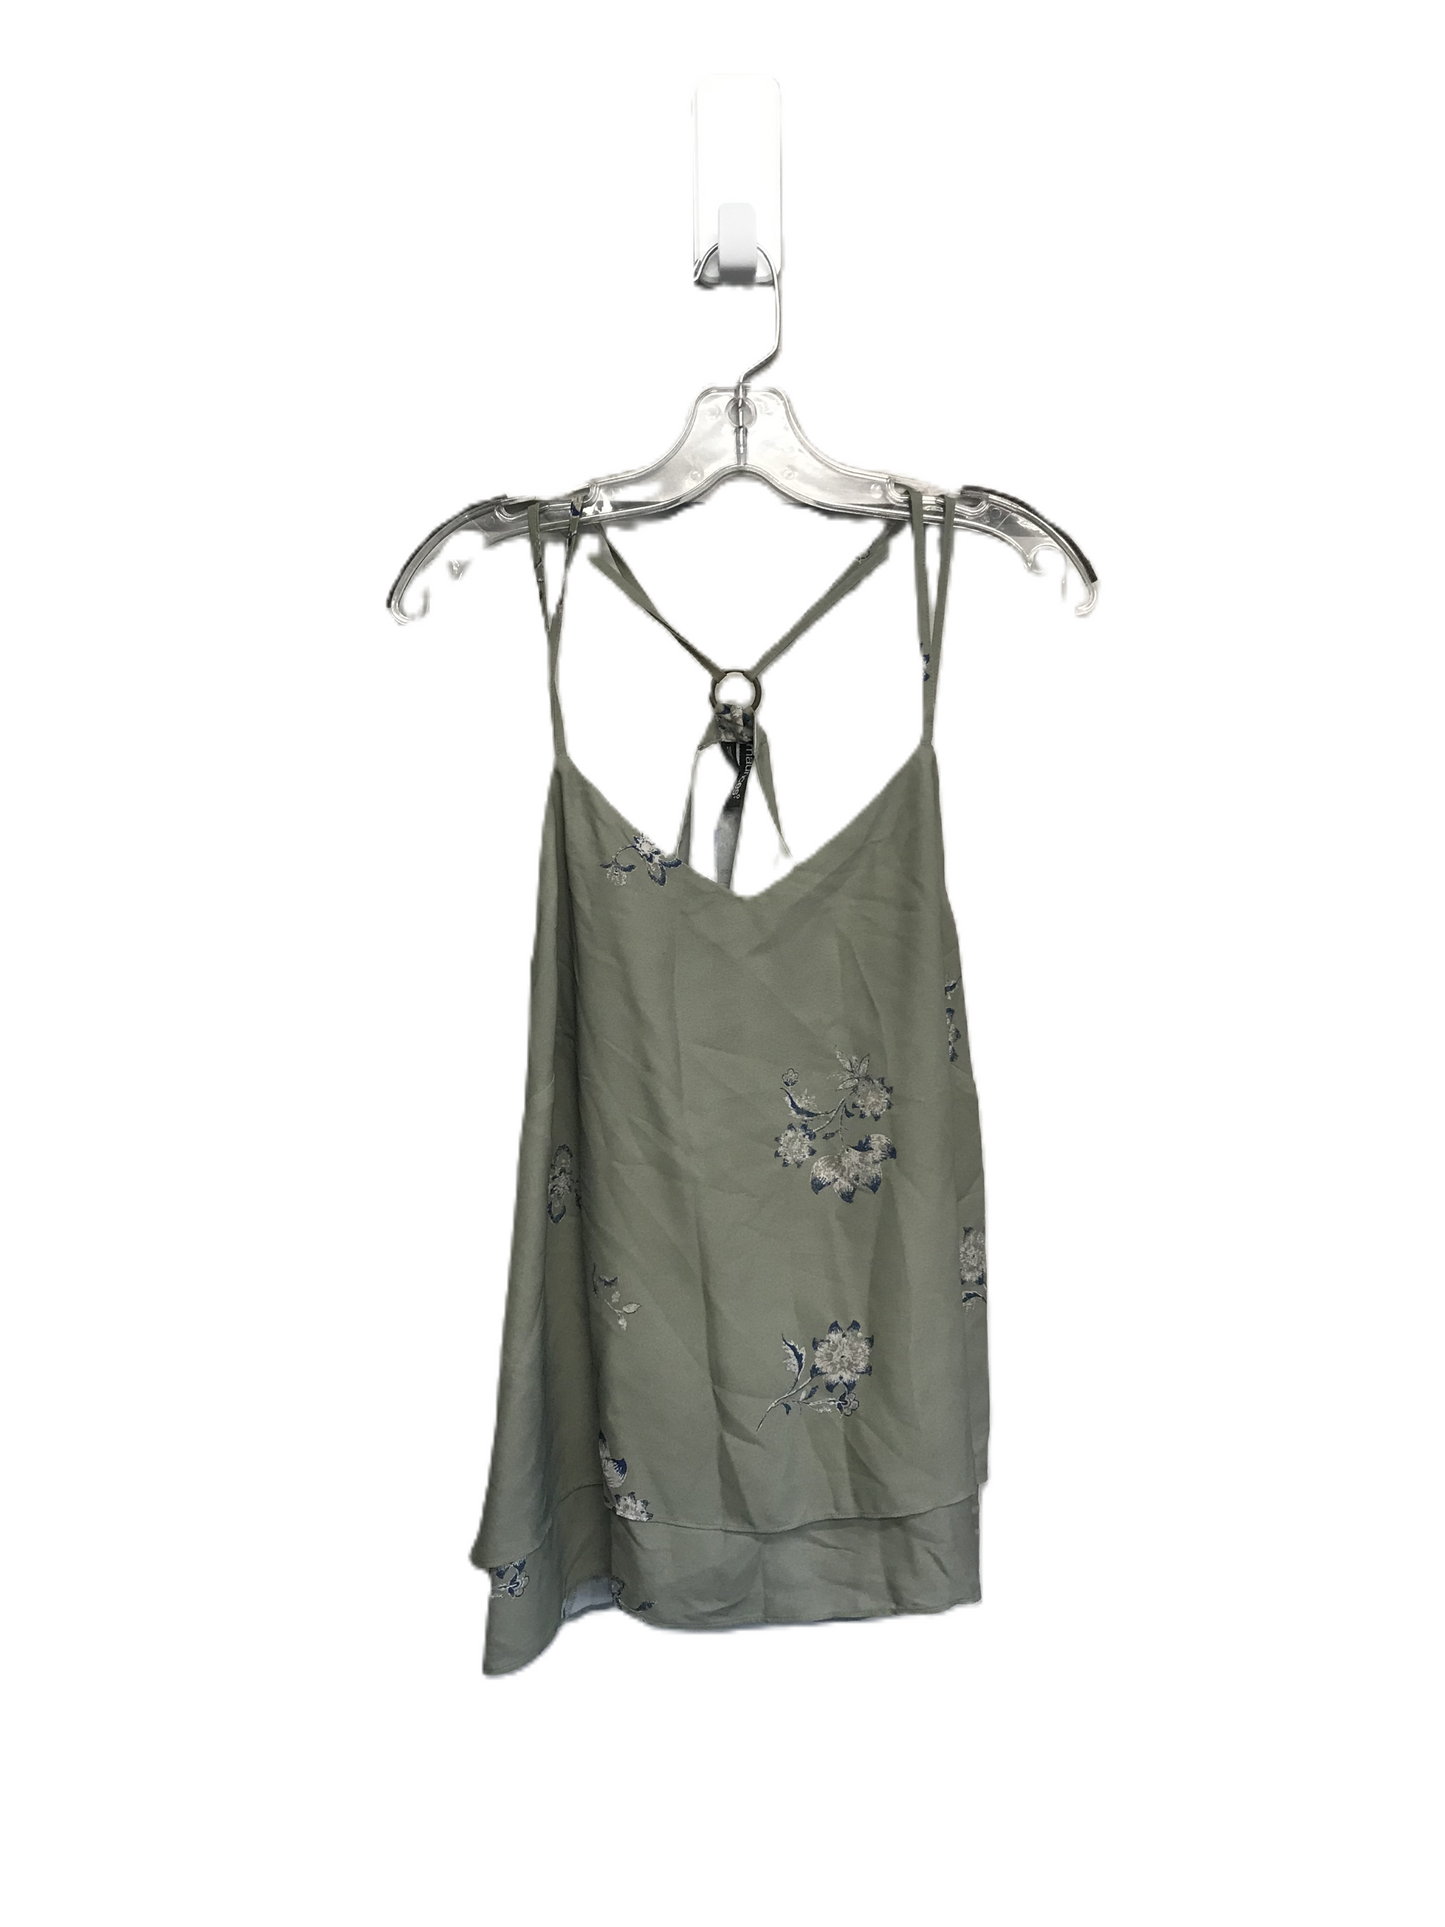 Green Top Sleeveless By Maurices, Size: 1x